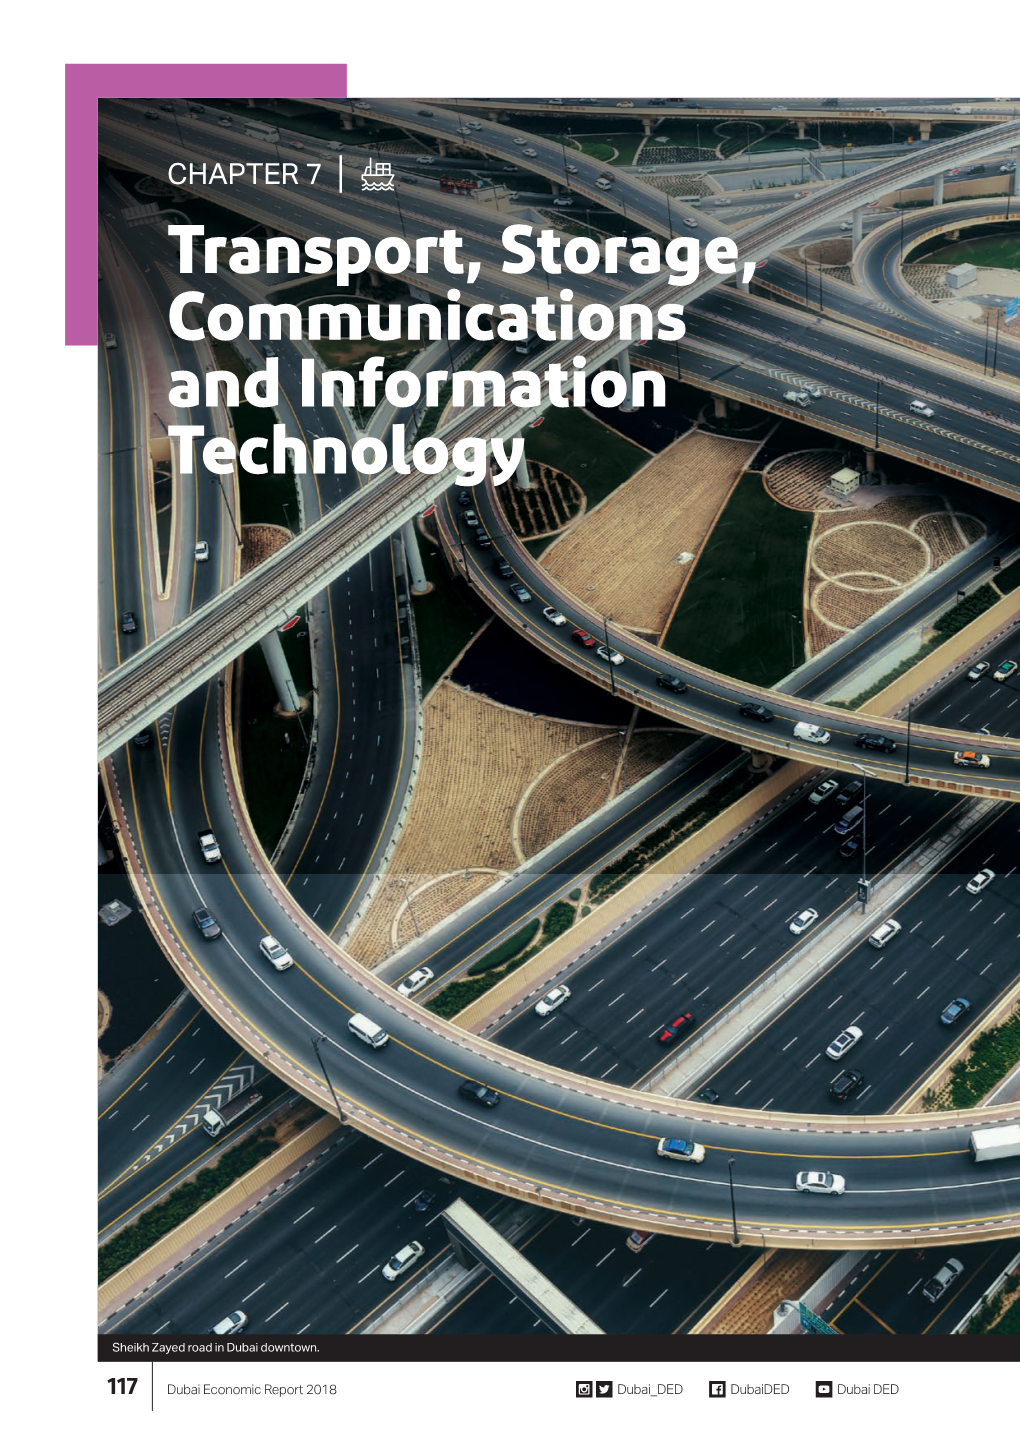 Transport, Storage, Communications and Information Technology